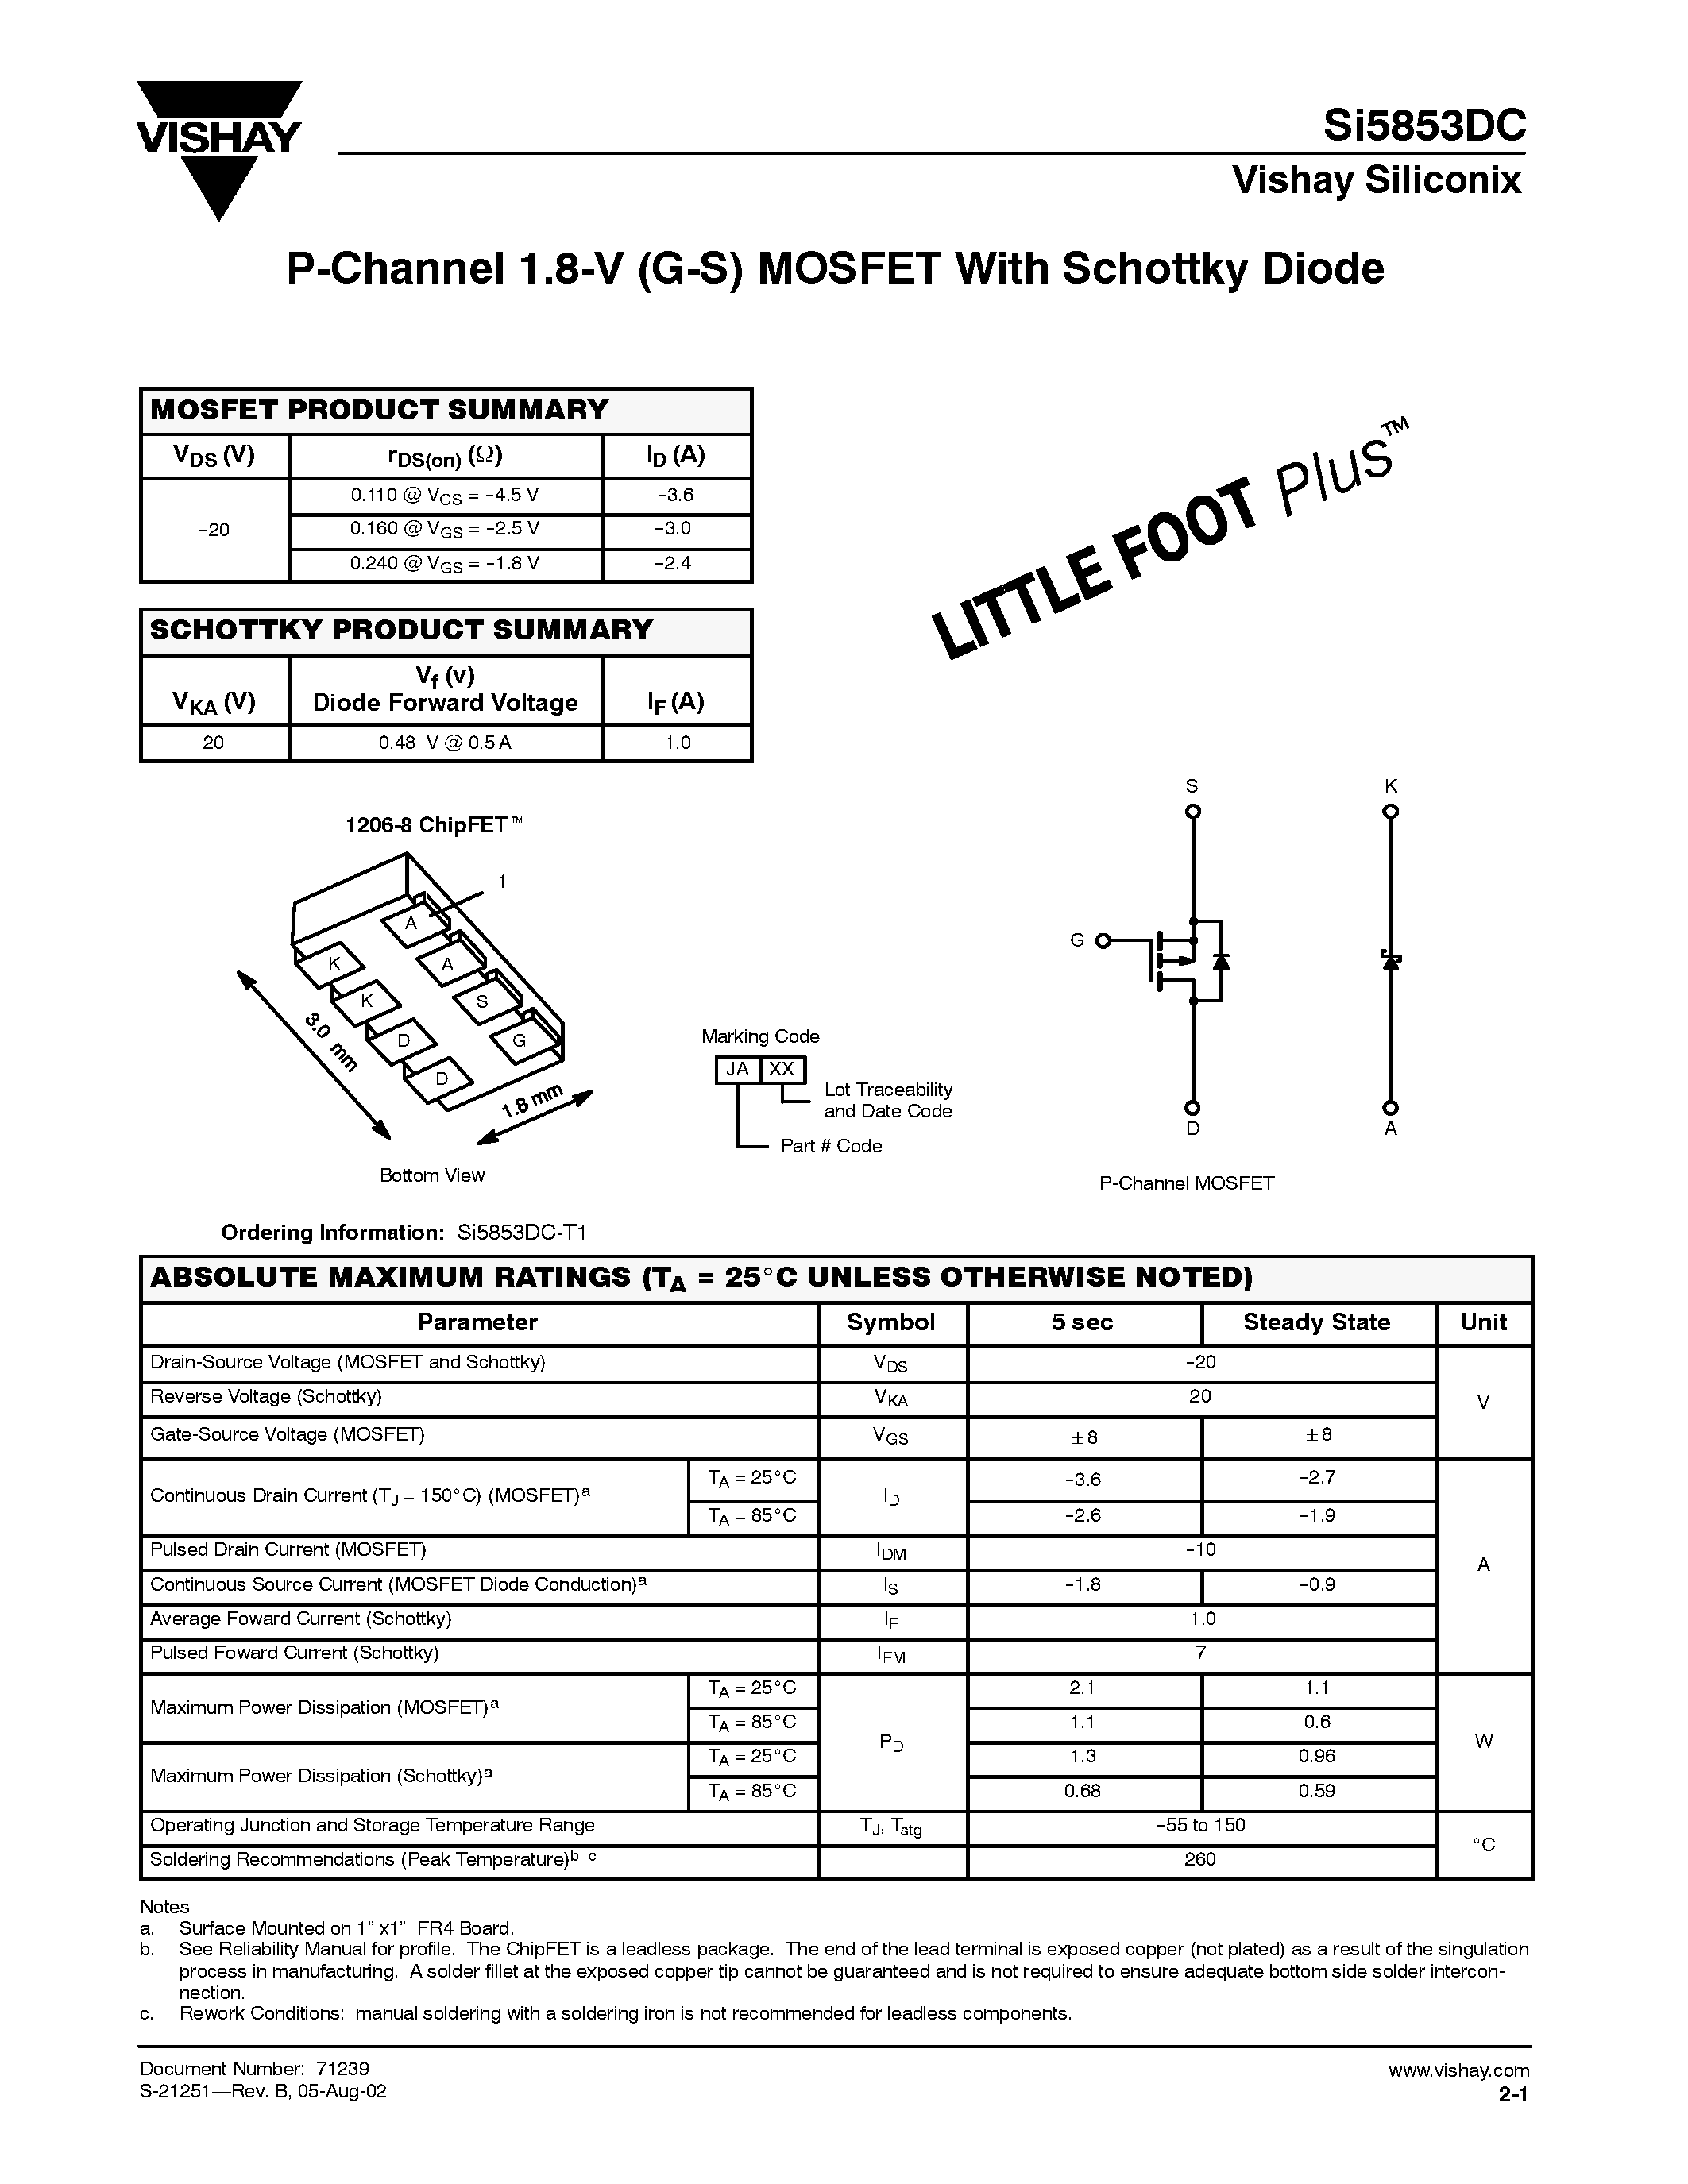 Datasheet SI5853DC - P-Channel 1.8-V (G-S) MOSFET With Schottky Diode page 1